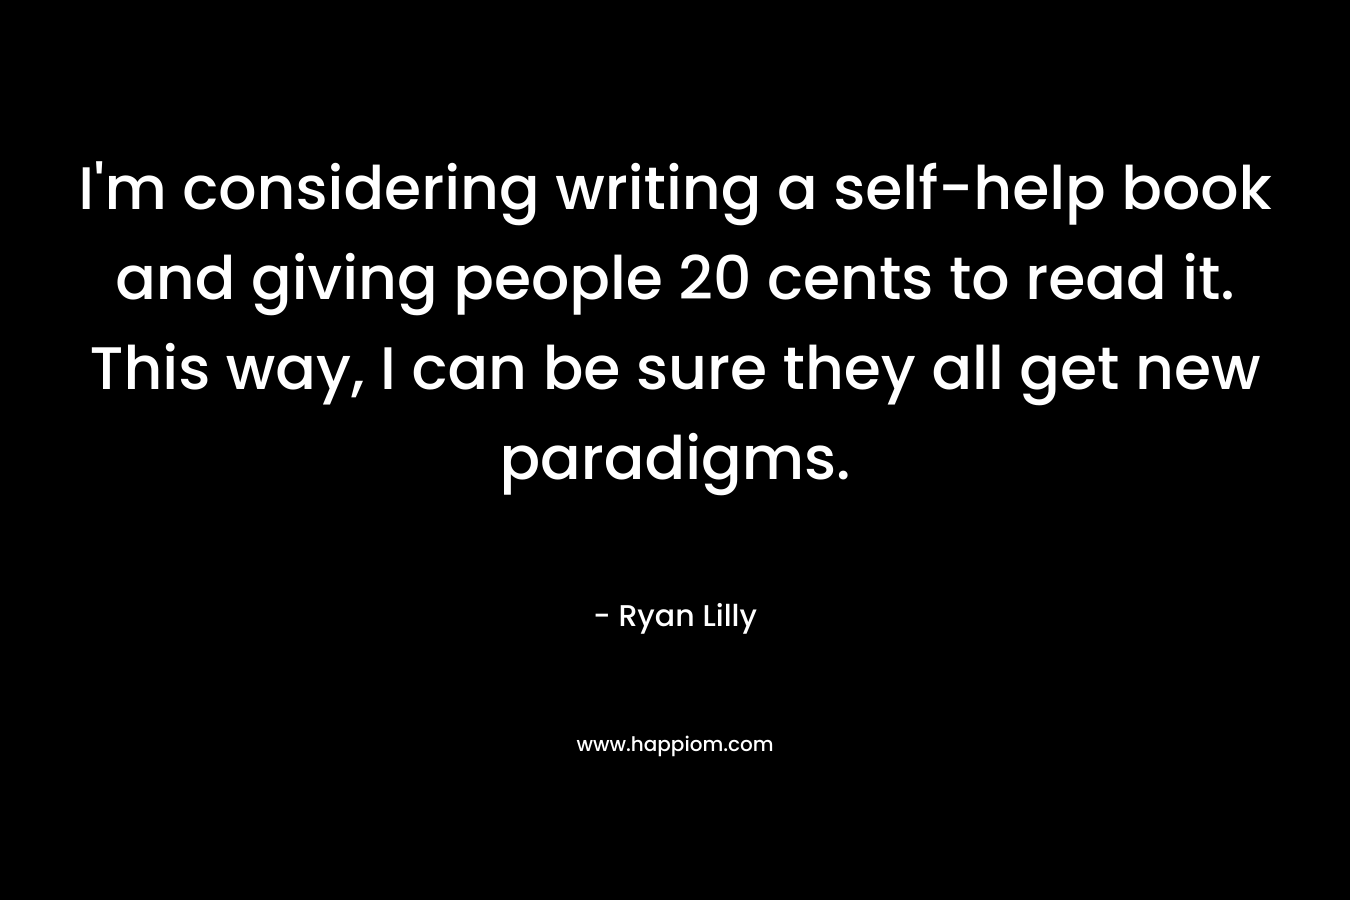 I’m considering writing a self-help book and giving people 20 cents to read it. This way, I can be sure they all get new paradigms. – Ryan Lilly